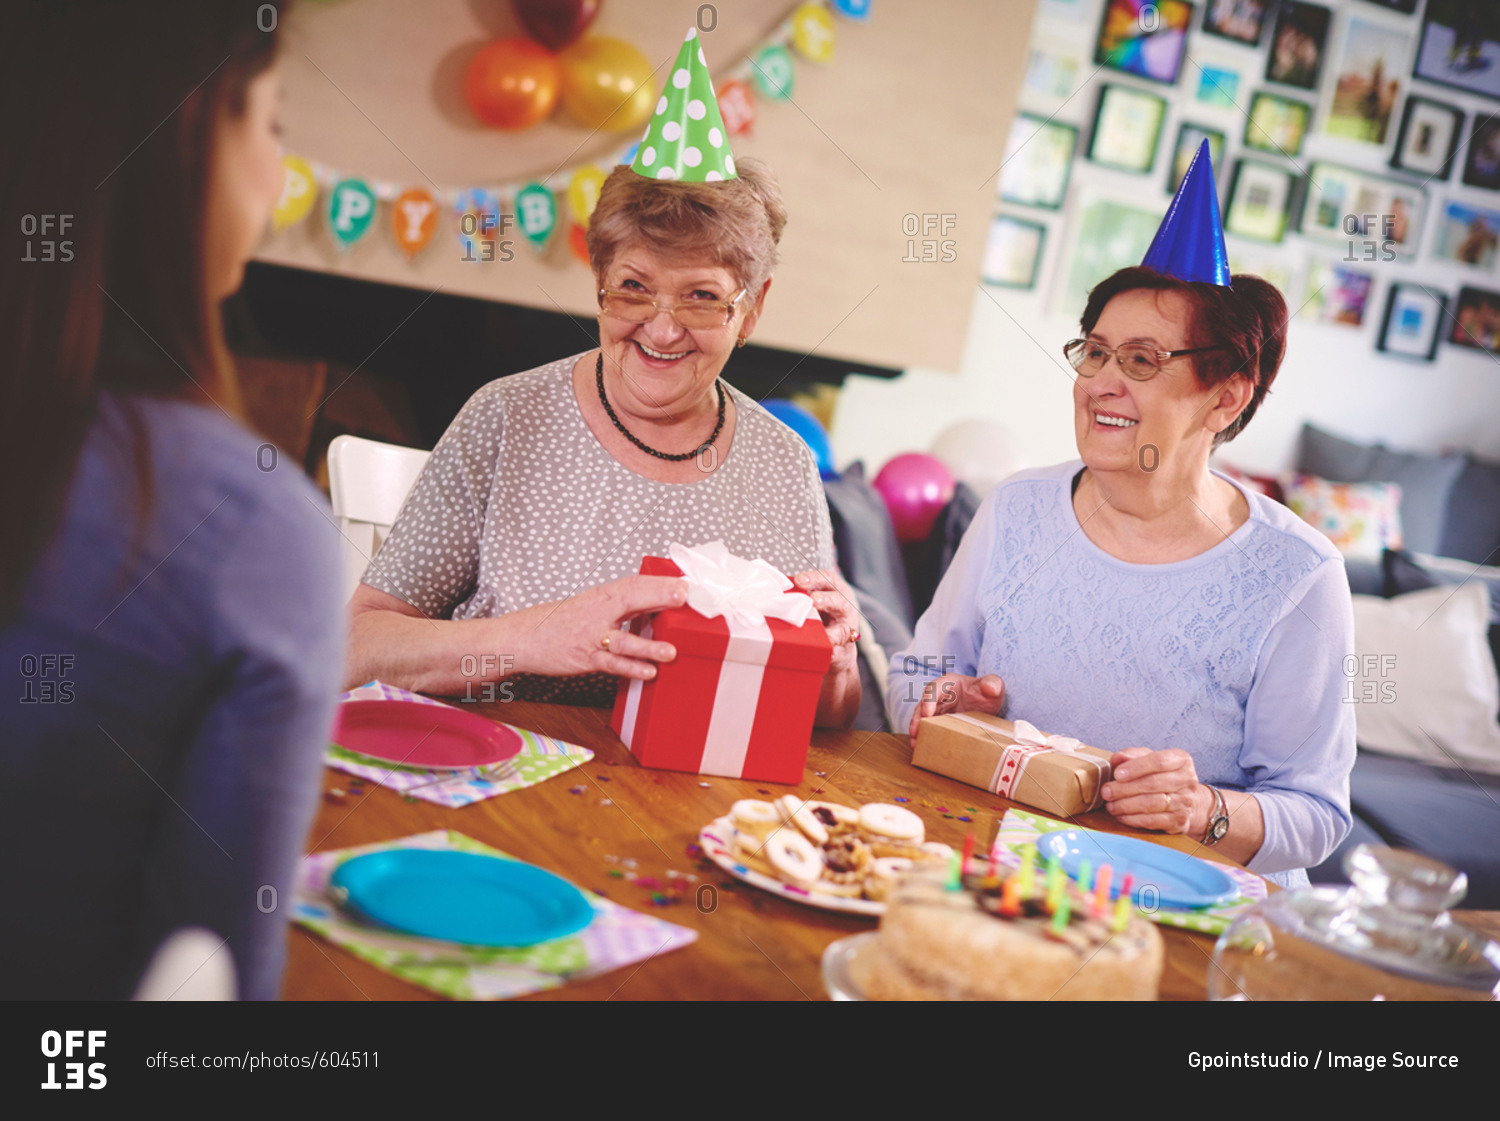 Daughter talking to mother and friend at birthday party